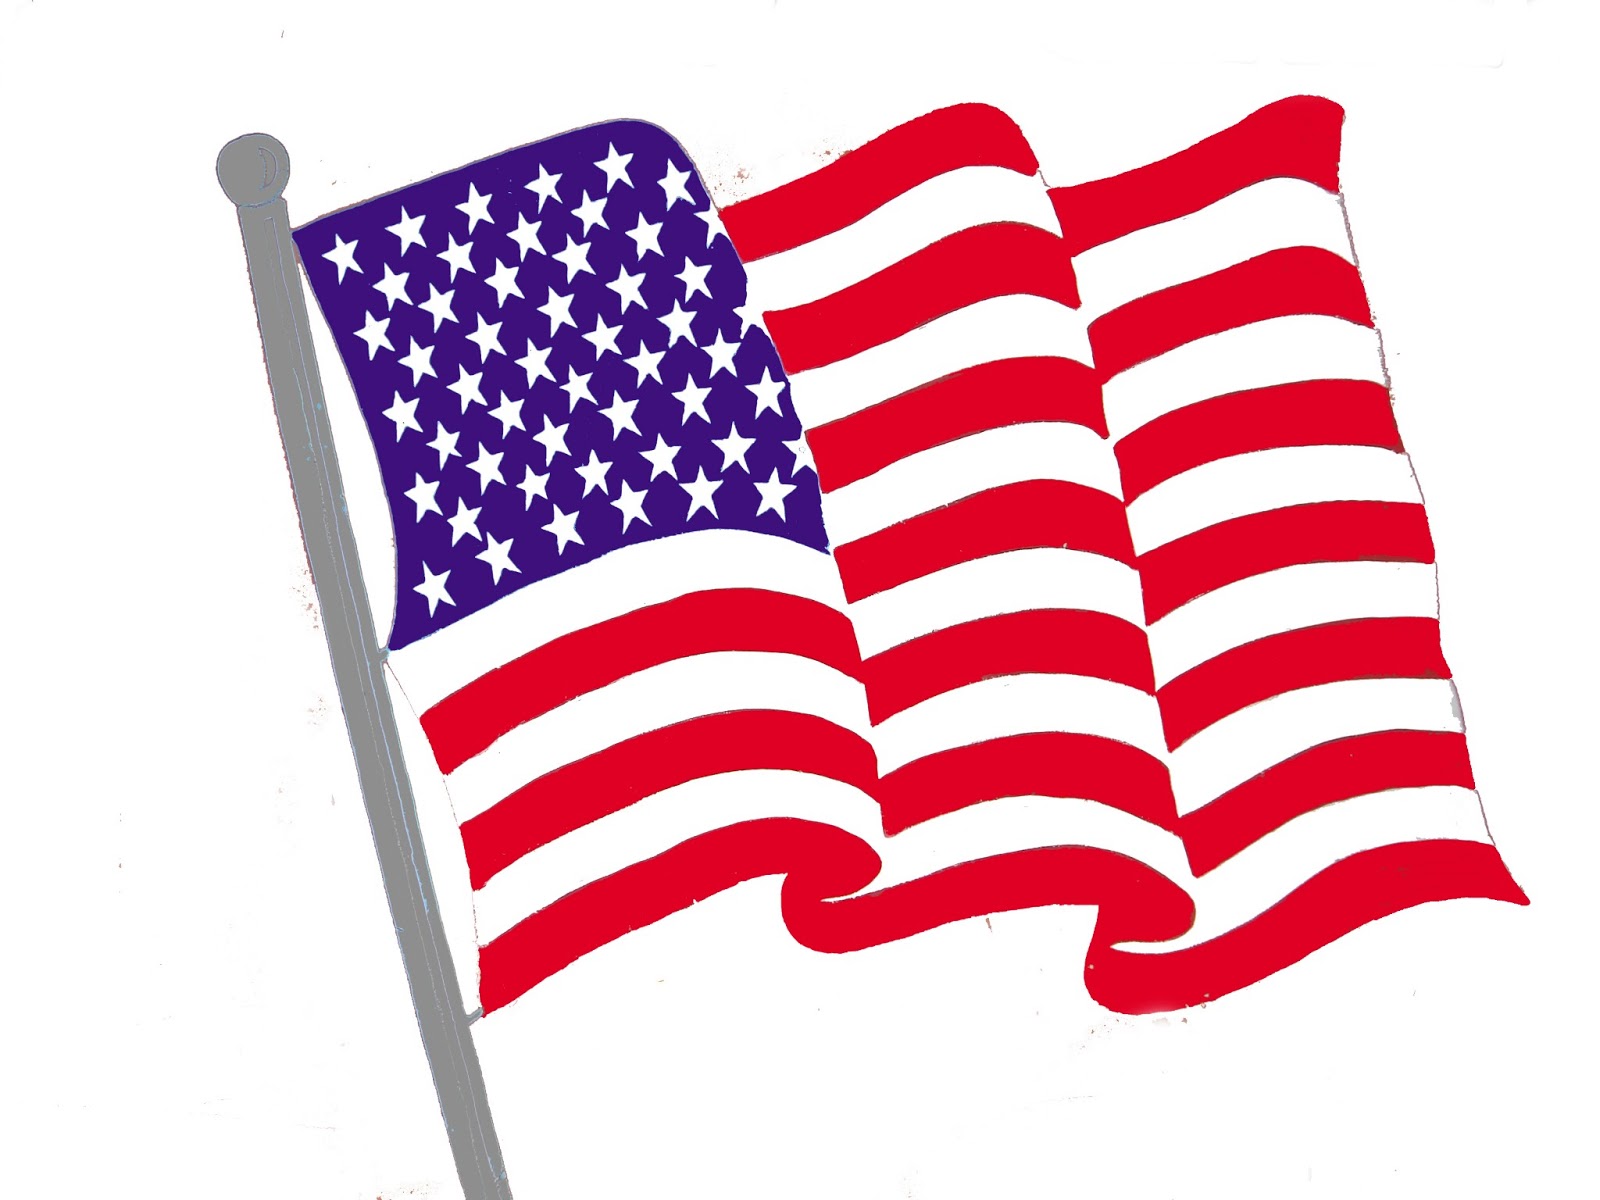 Free american flags clipart 3